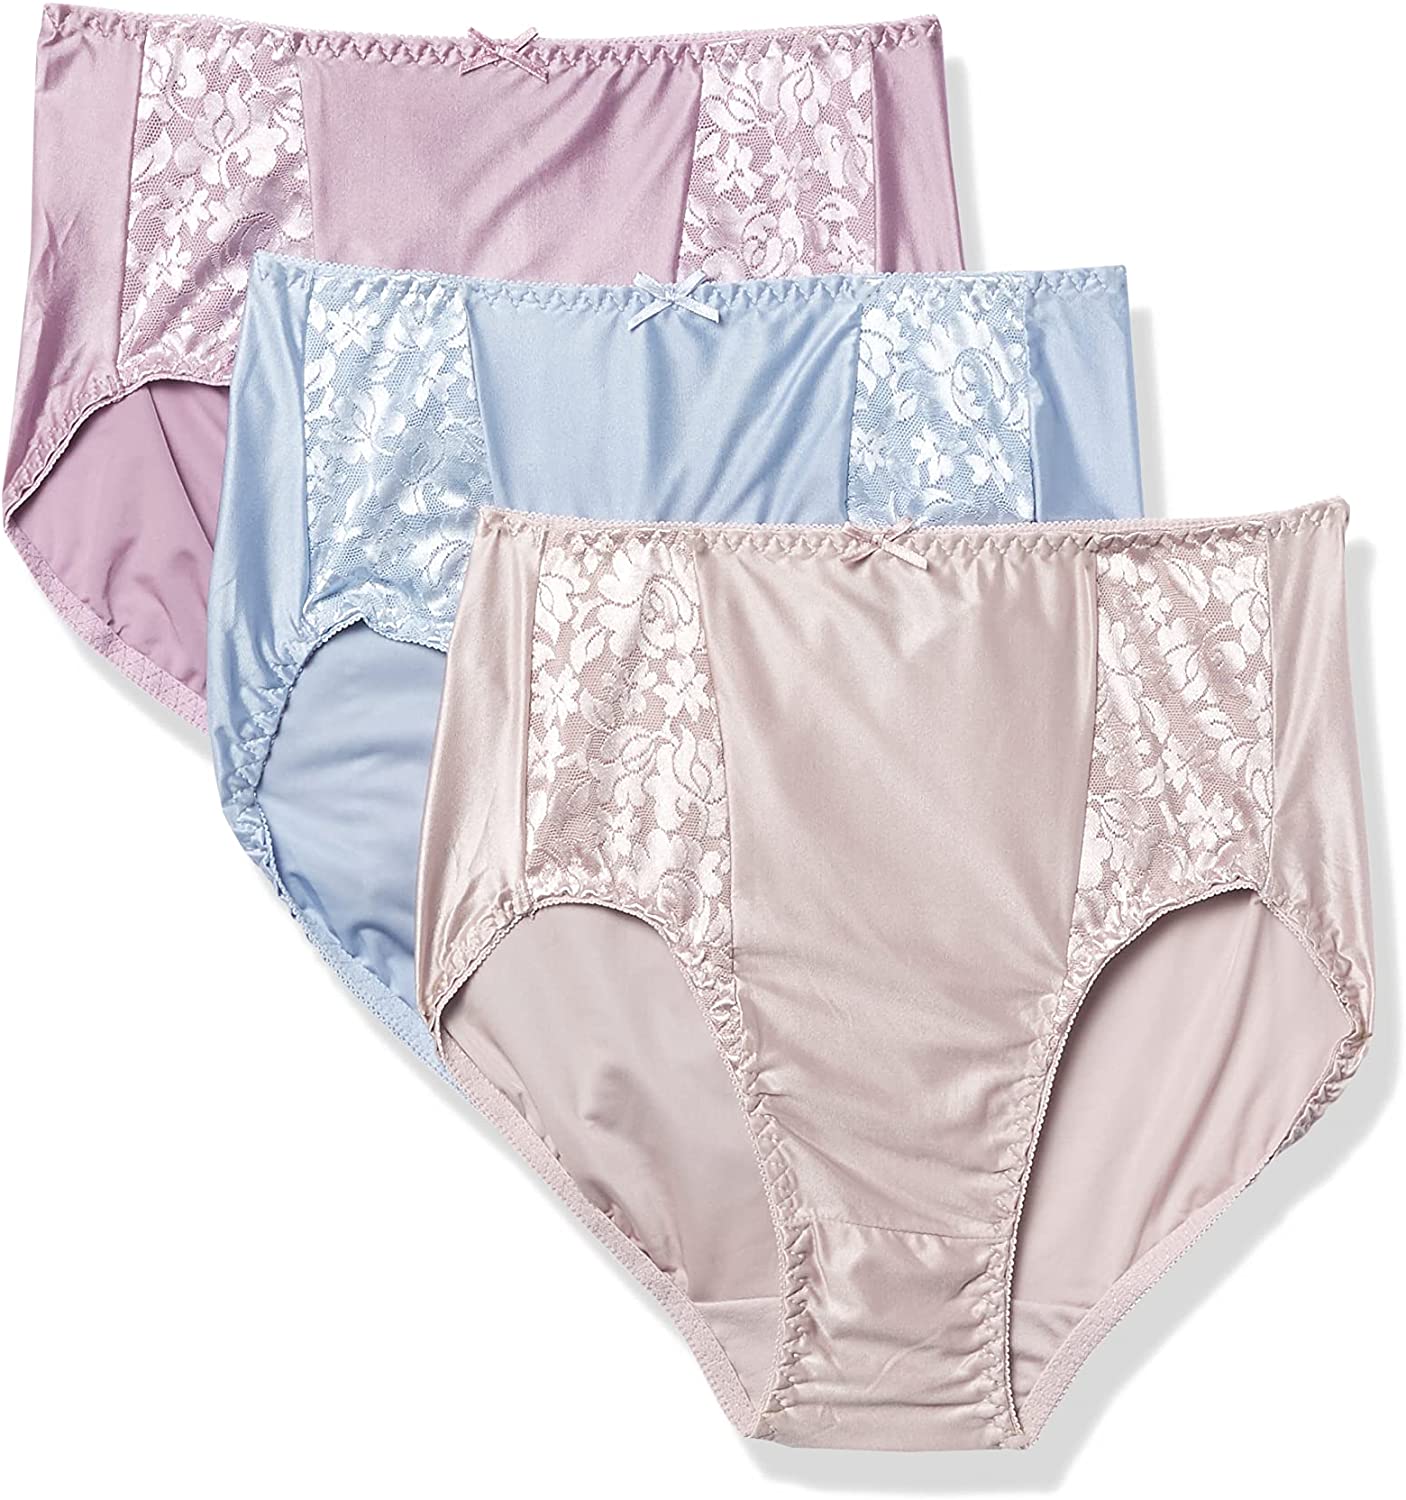 Bali Womens Double Support Hi-Cut Panty 3-Pack - Apparel Direct